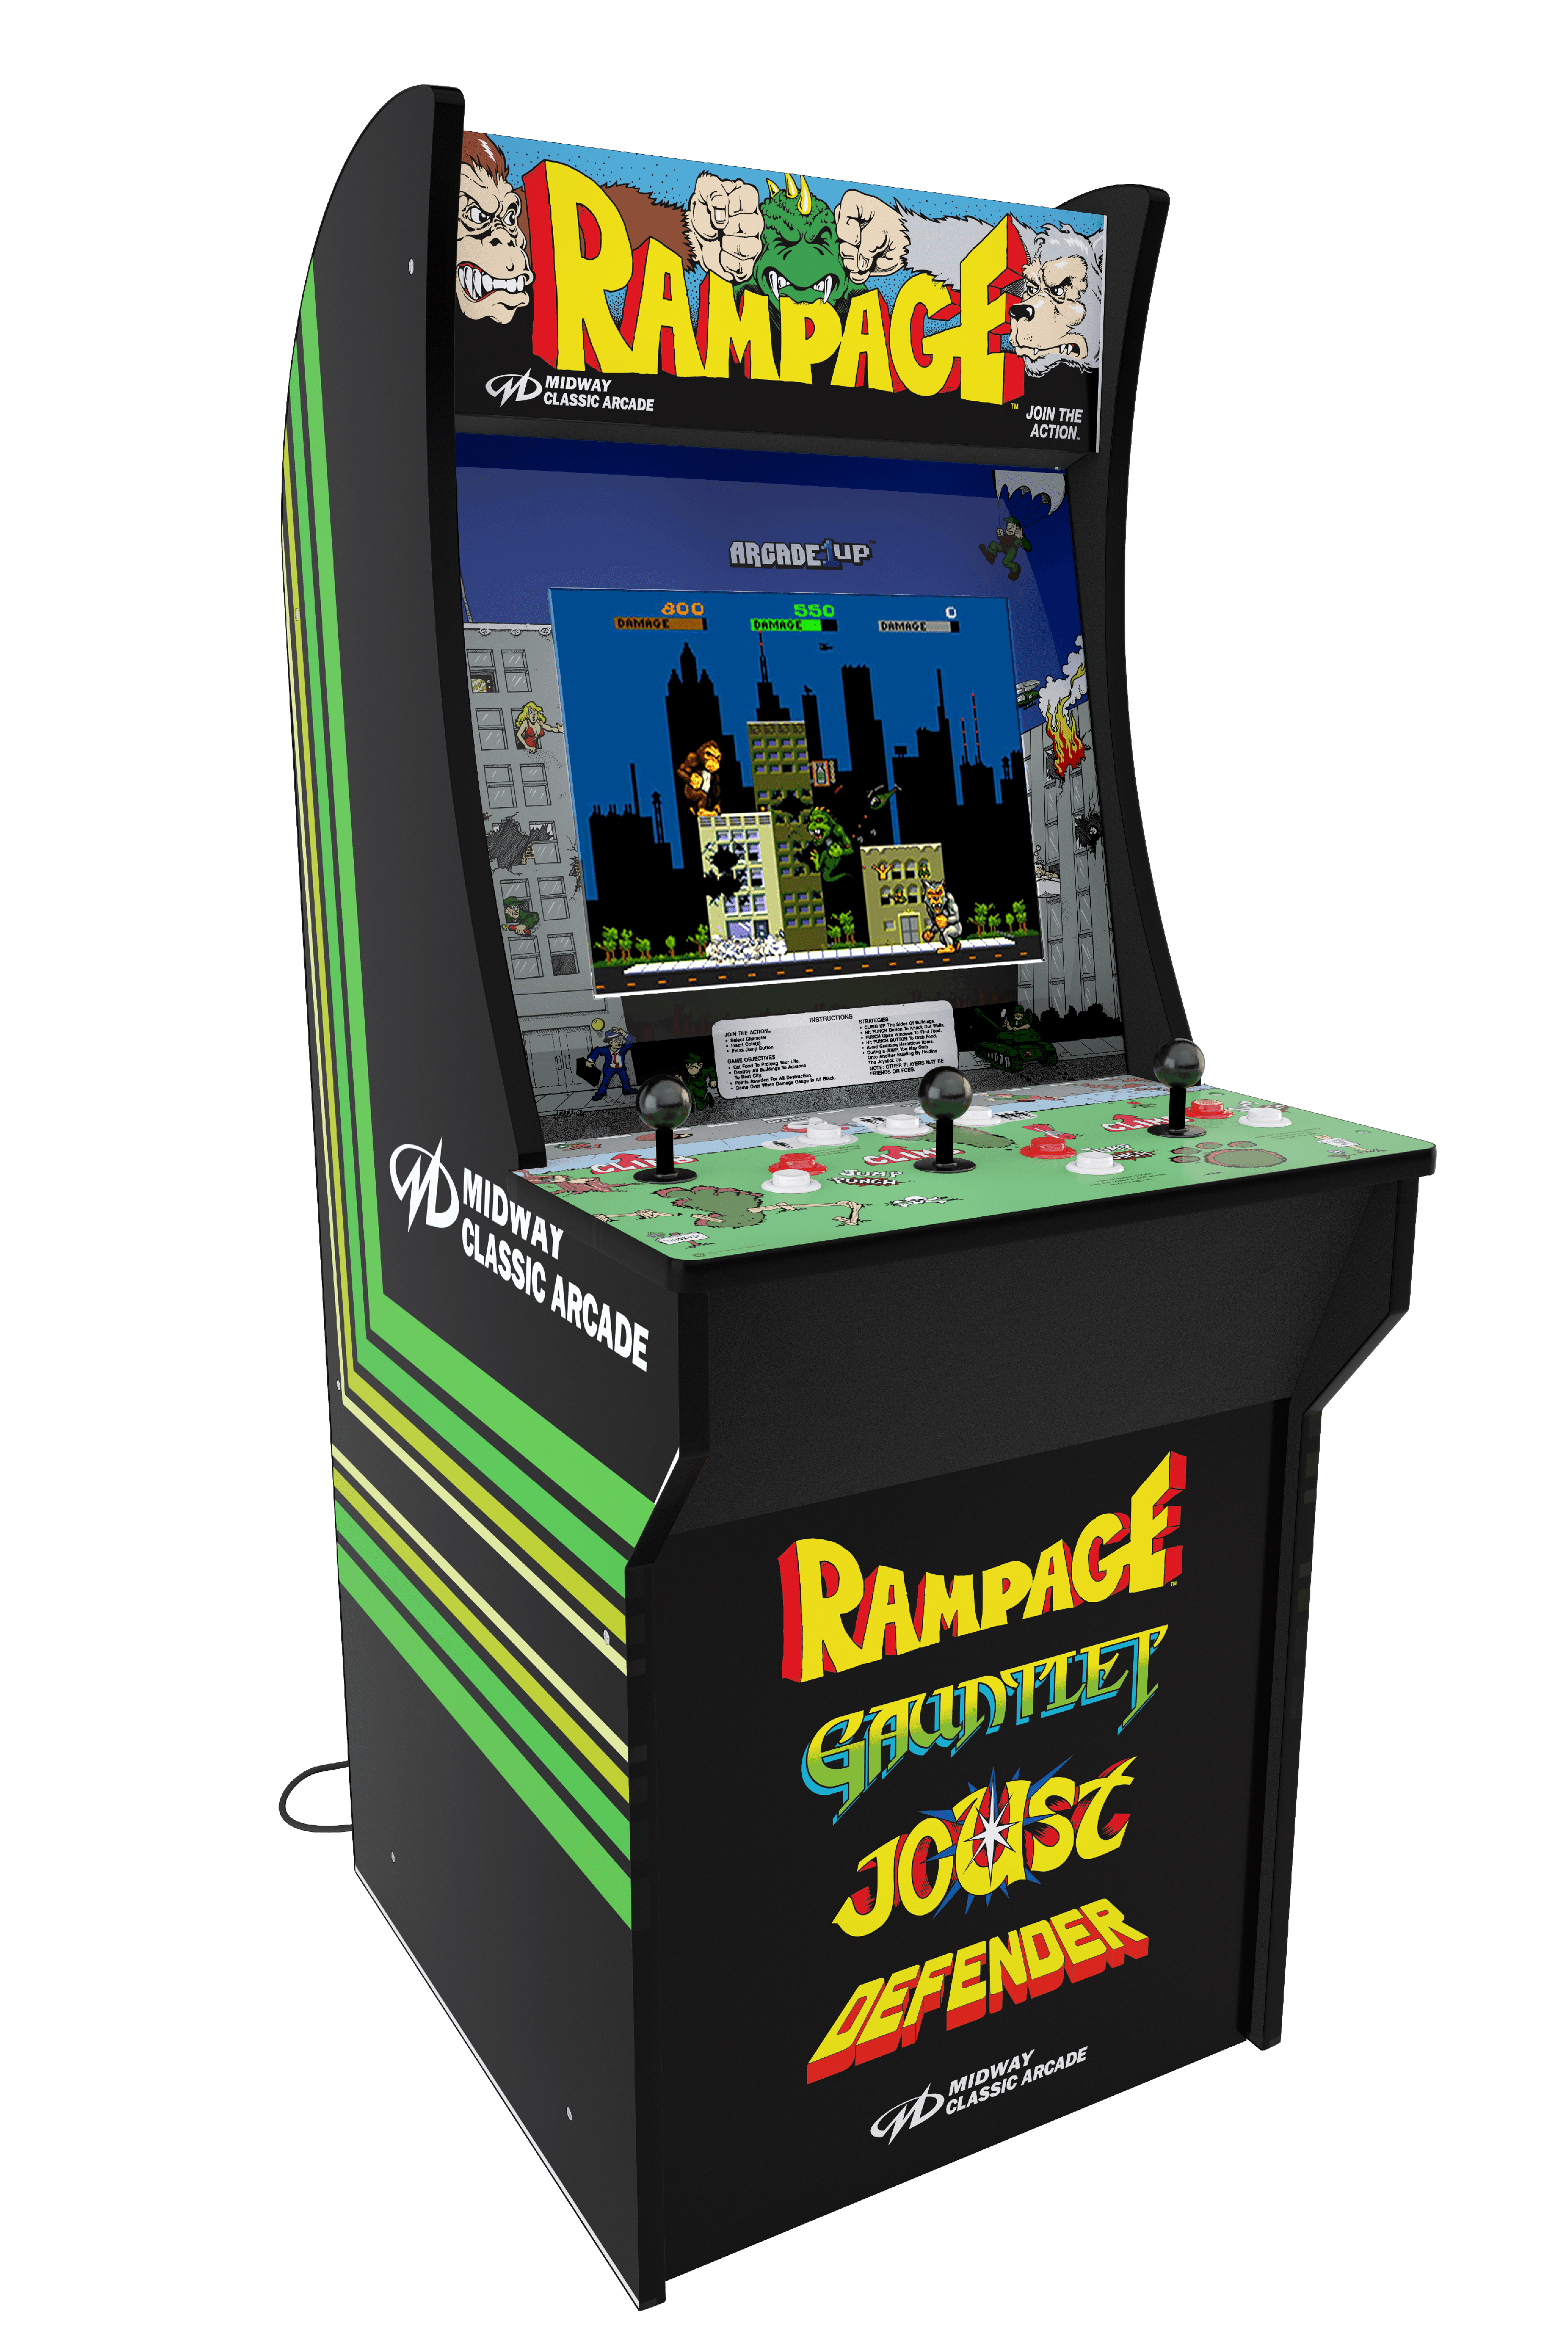 Rampage arcade1up 3 player arcade game  NEW in box 